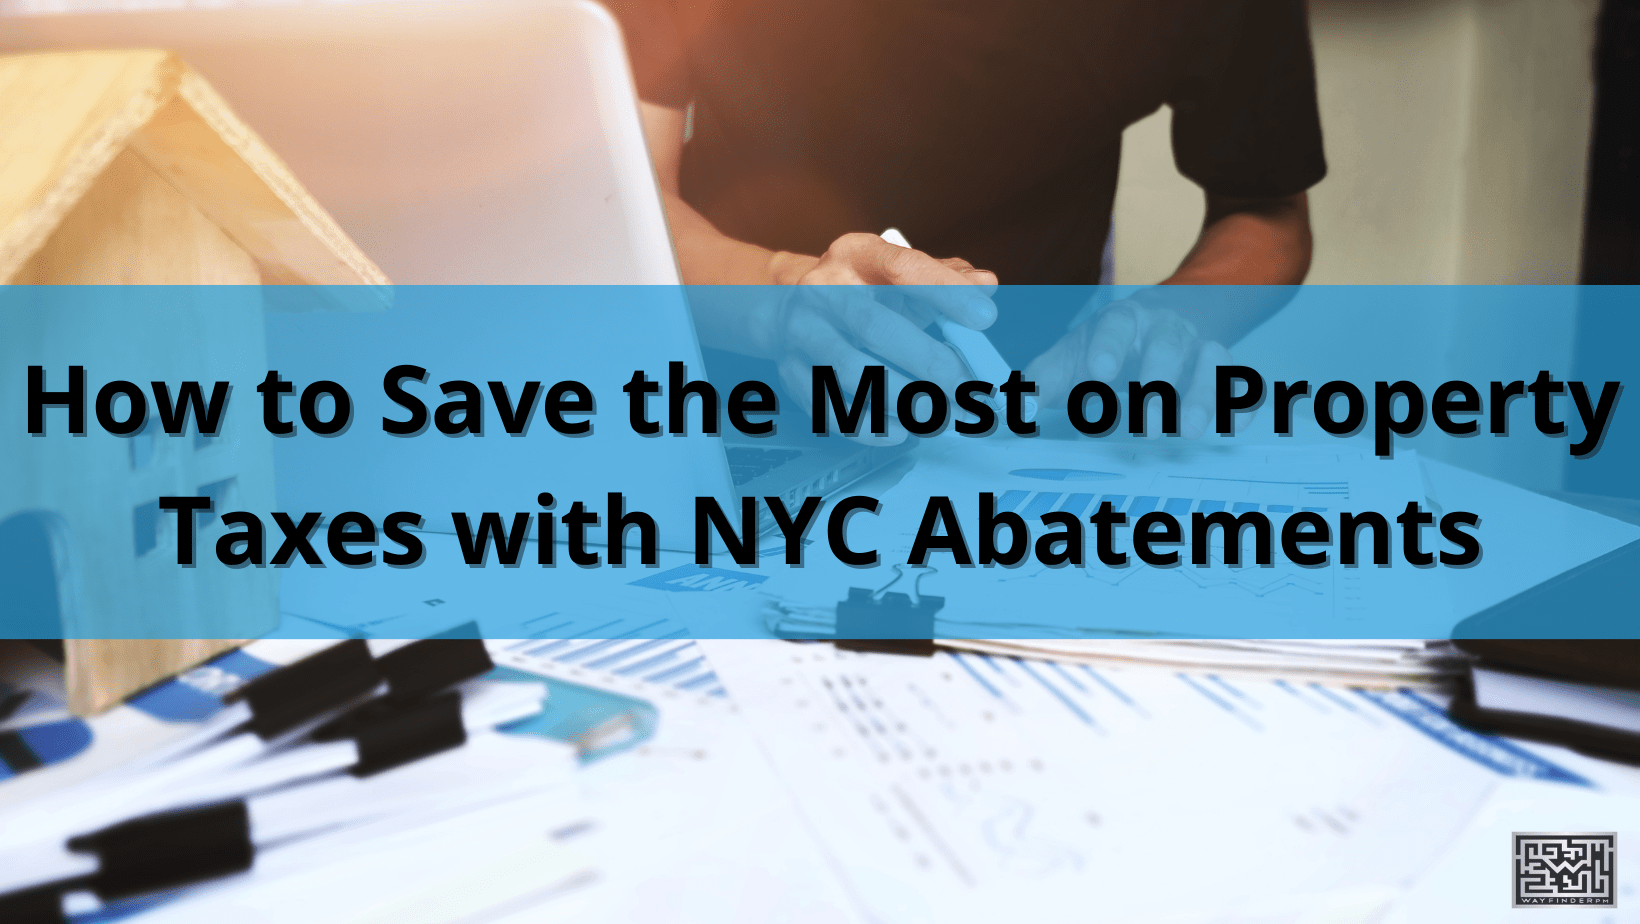 How to Save the Most on Property Taxes with NYC Abatements